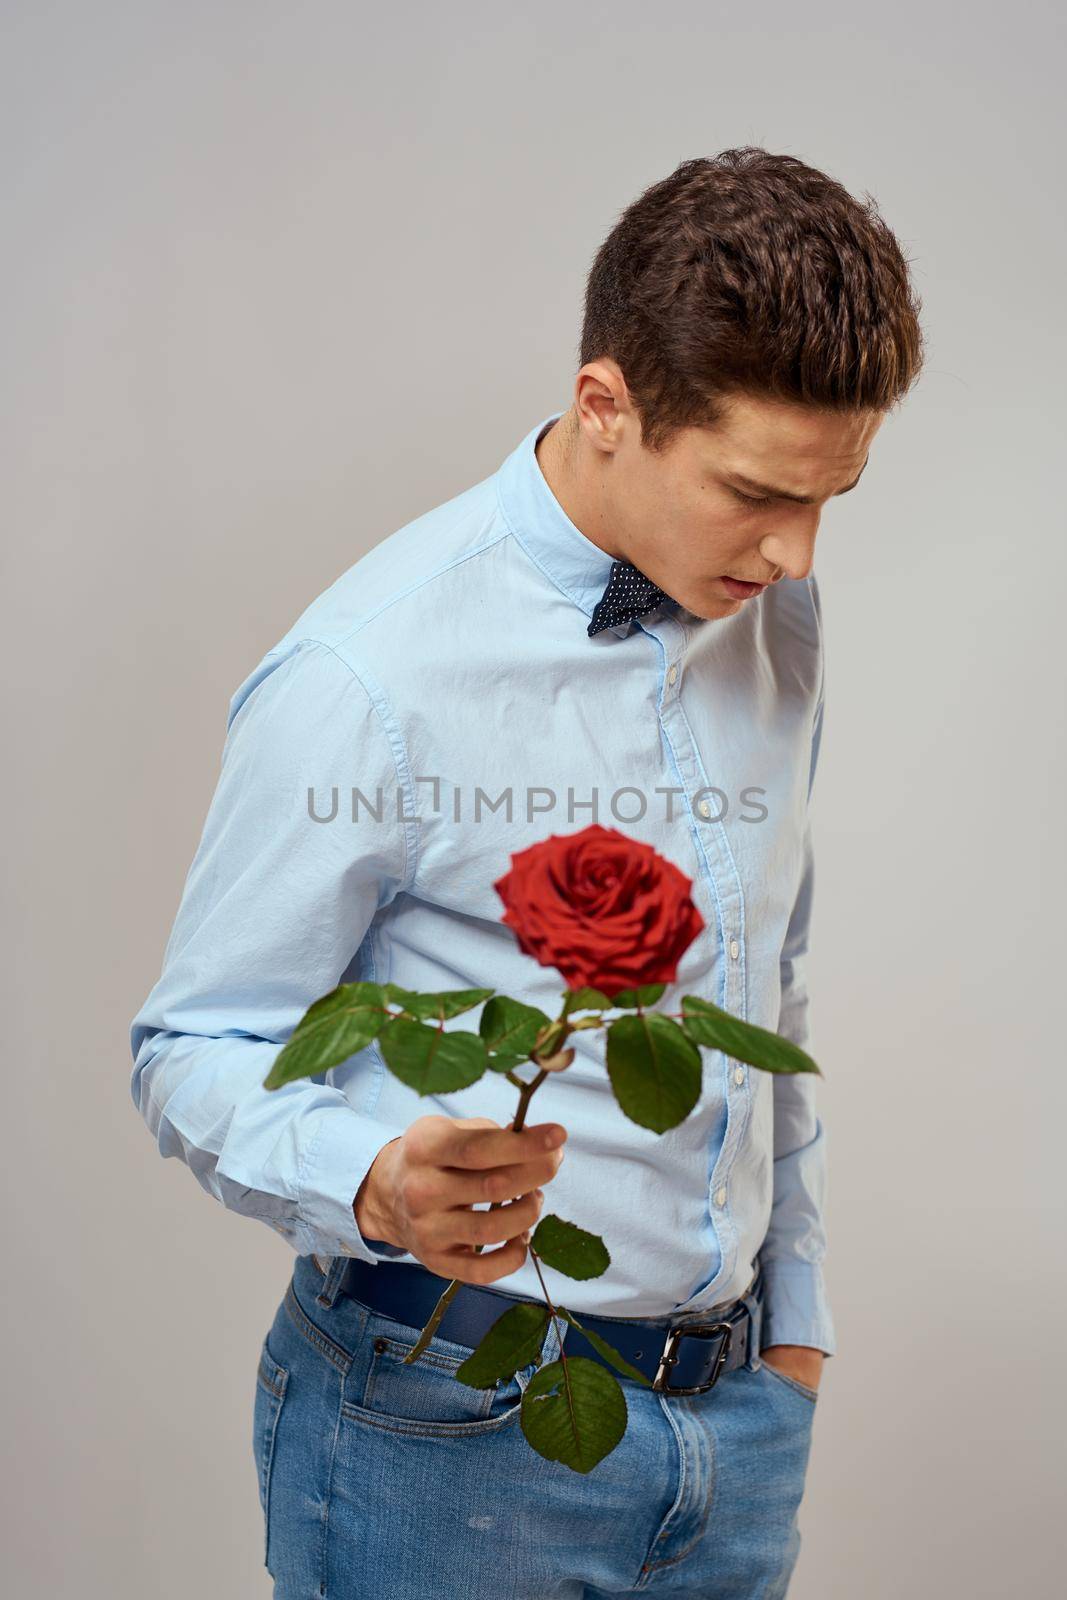 man holding a rose dating waiting dating lifestyle by SHOTPRIME